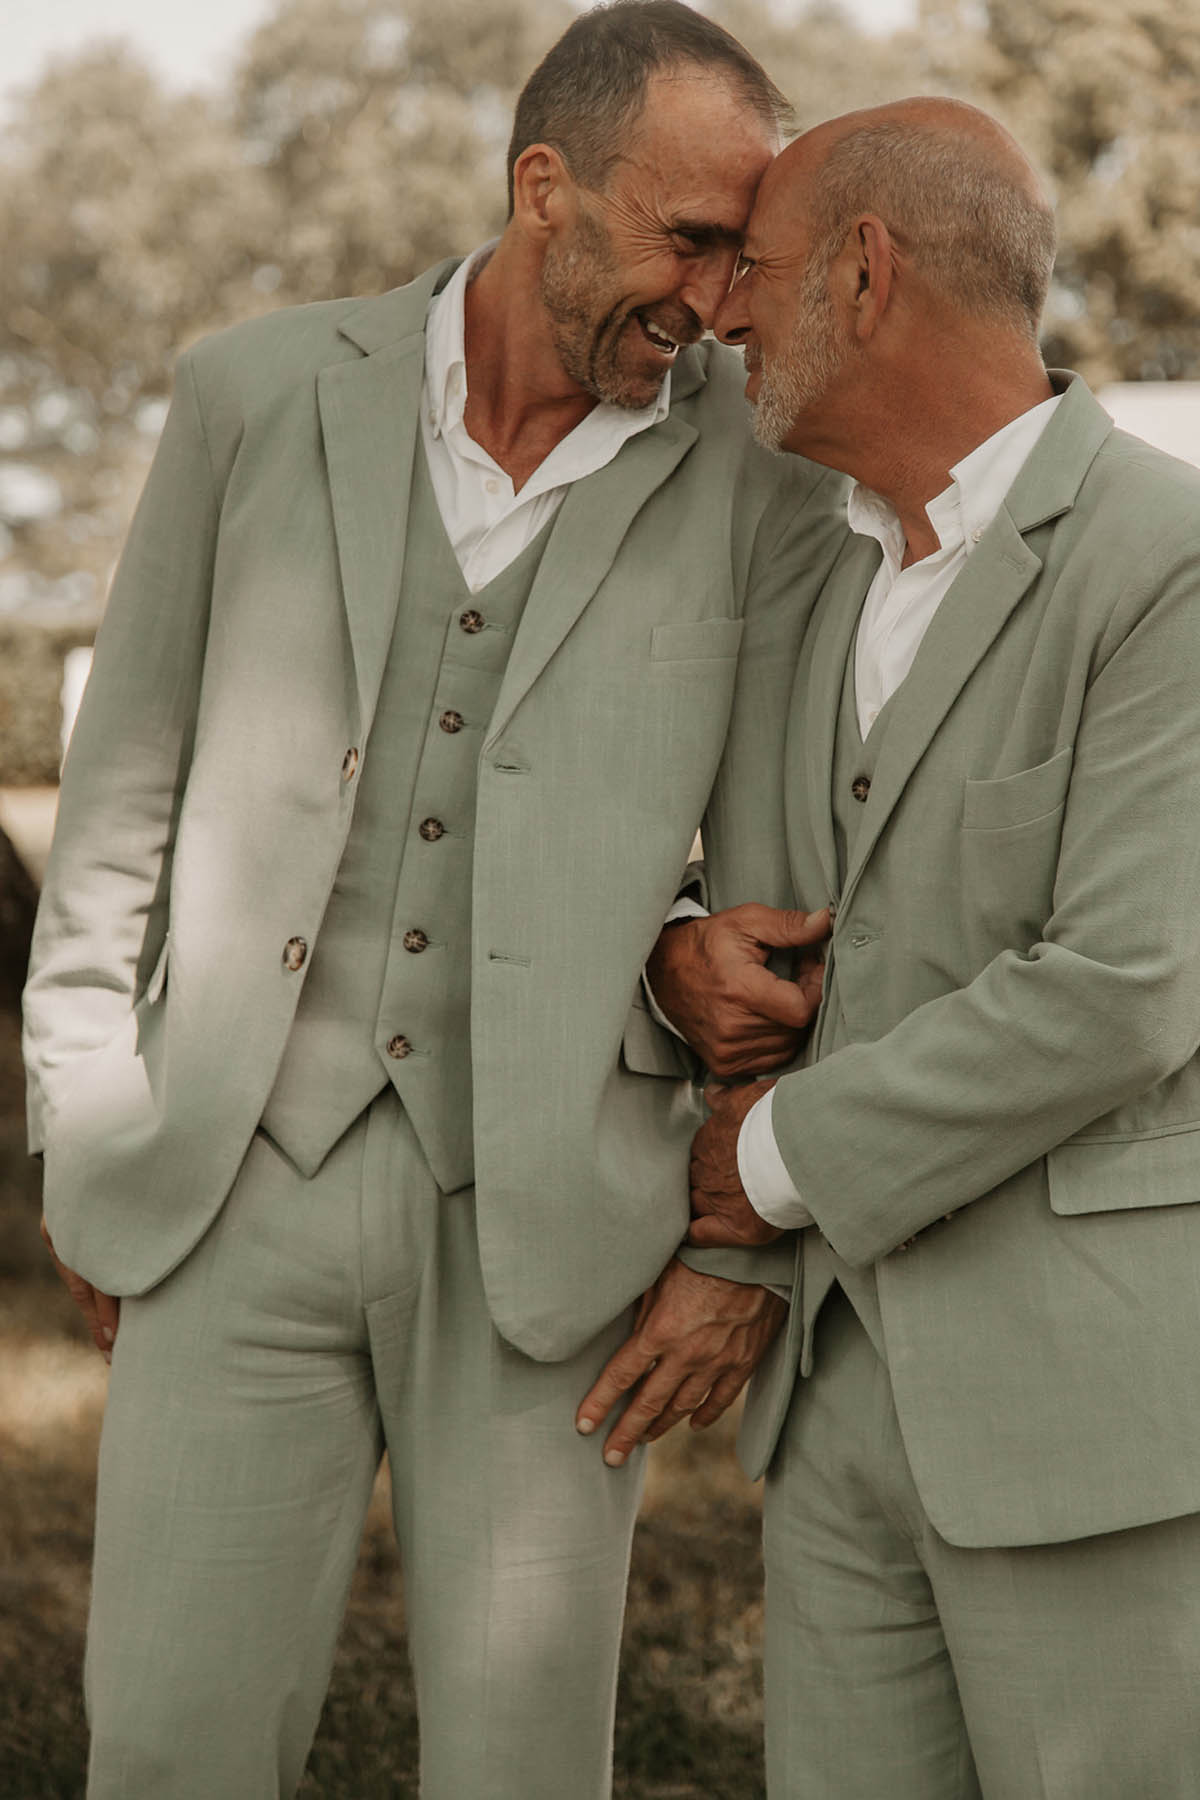 Two grooms in sage gray suits with white shirts stand arm in arm with their foreheads pressed together